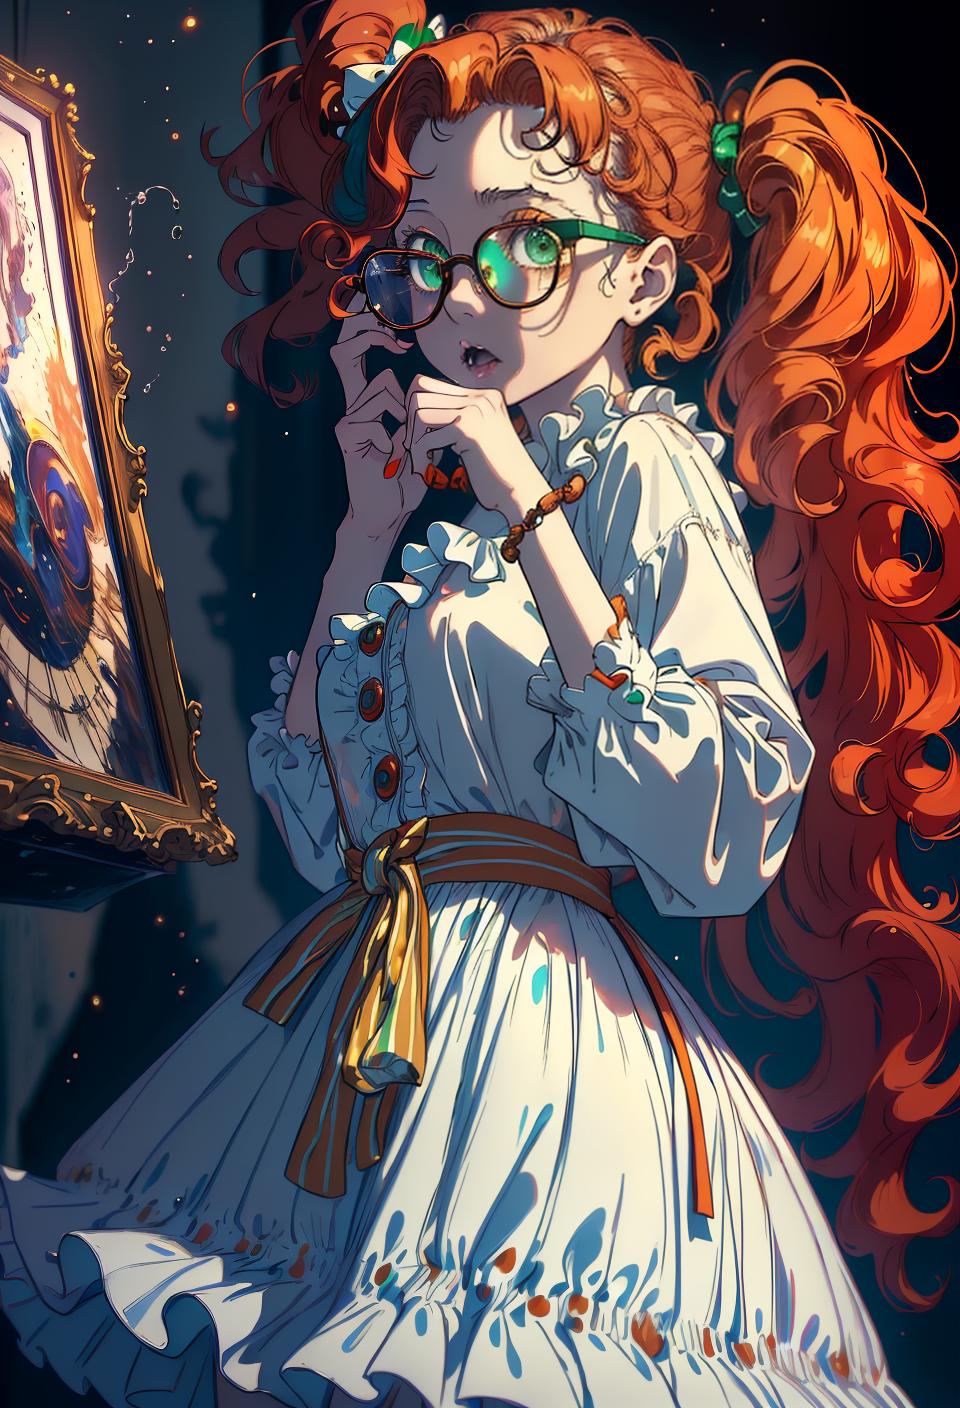  ((trending, highres, masterpiece, cinematic shot)), 1girl, young, female clown outfit, cosmic horror scene, medium-length wavy orange hair, side locks hairstyle, large green eyes, heroic personality, surprised expression, glasses, very pale skin, morbid, observant